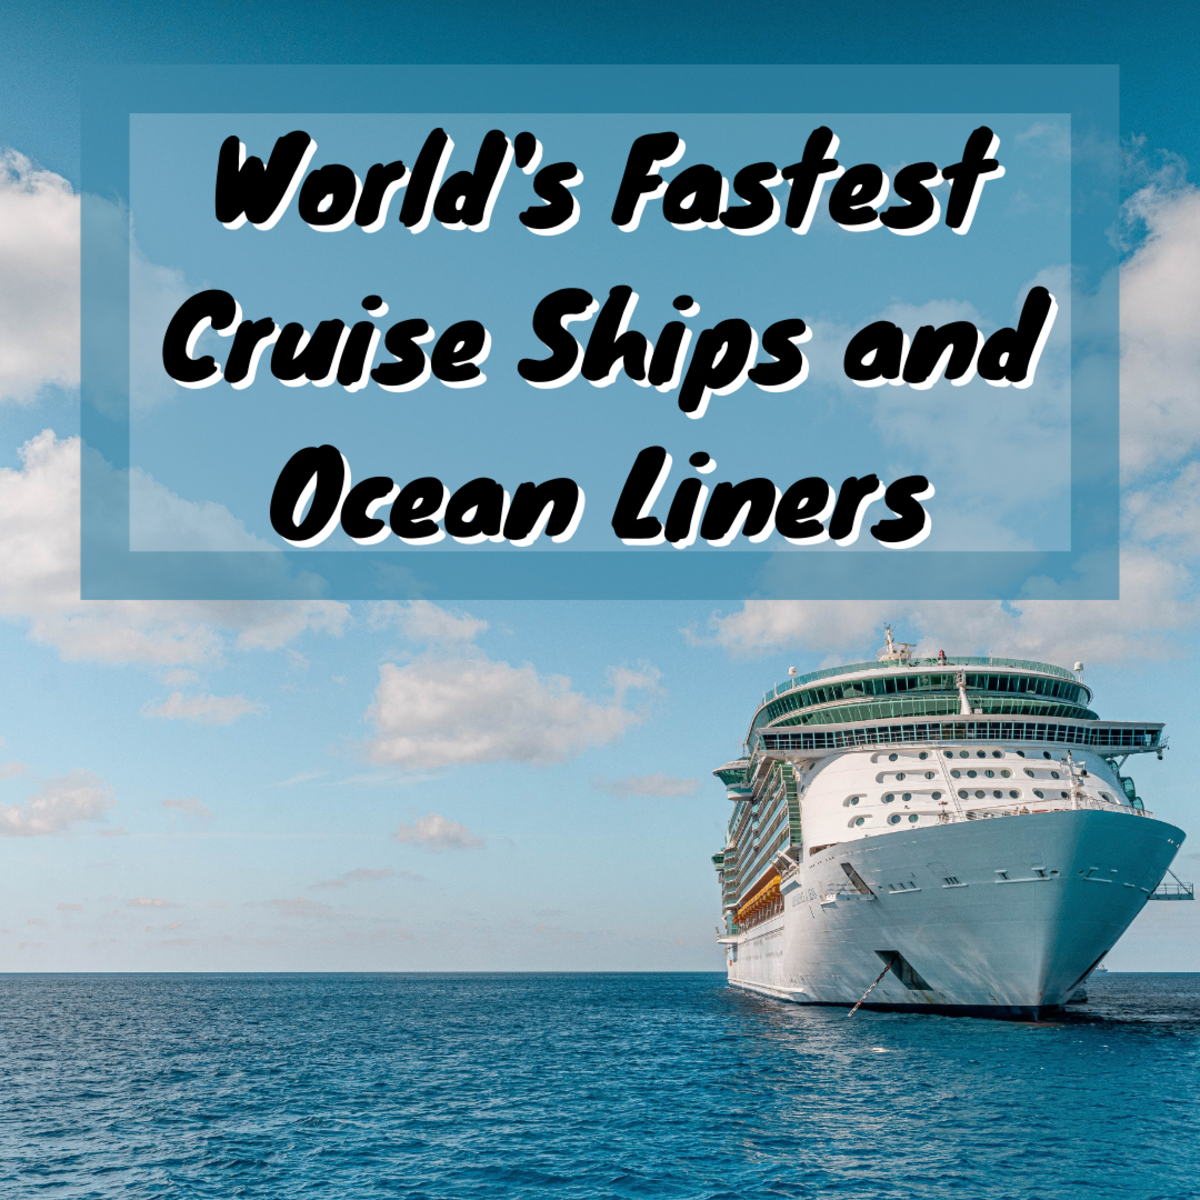 Learn about the fastest and most impressive cruise ships and ocean liners in the world.